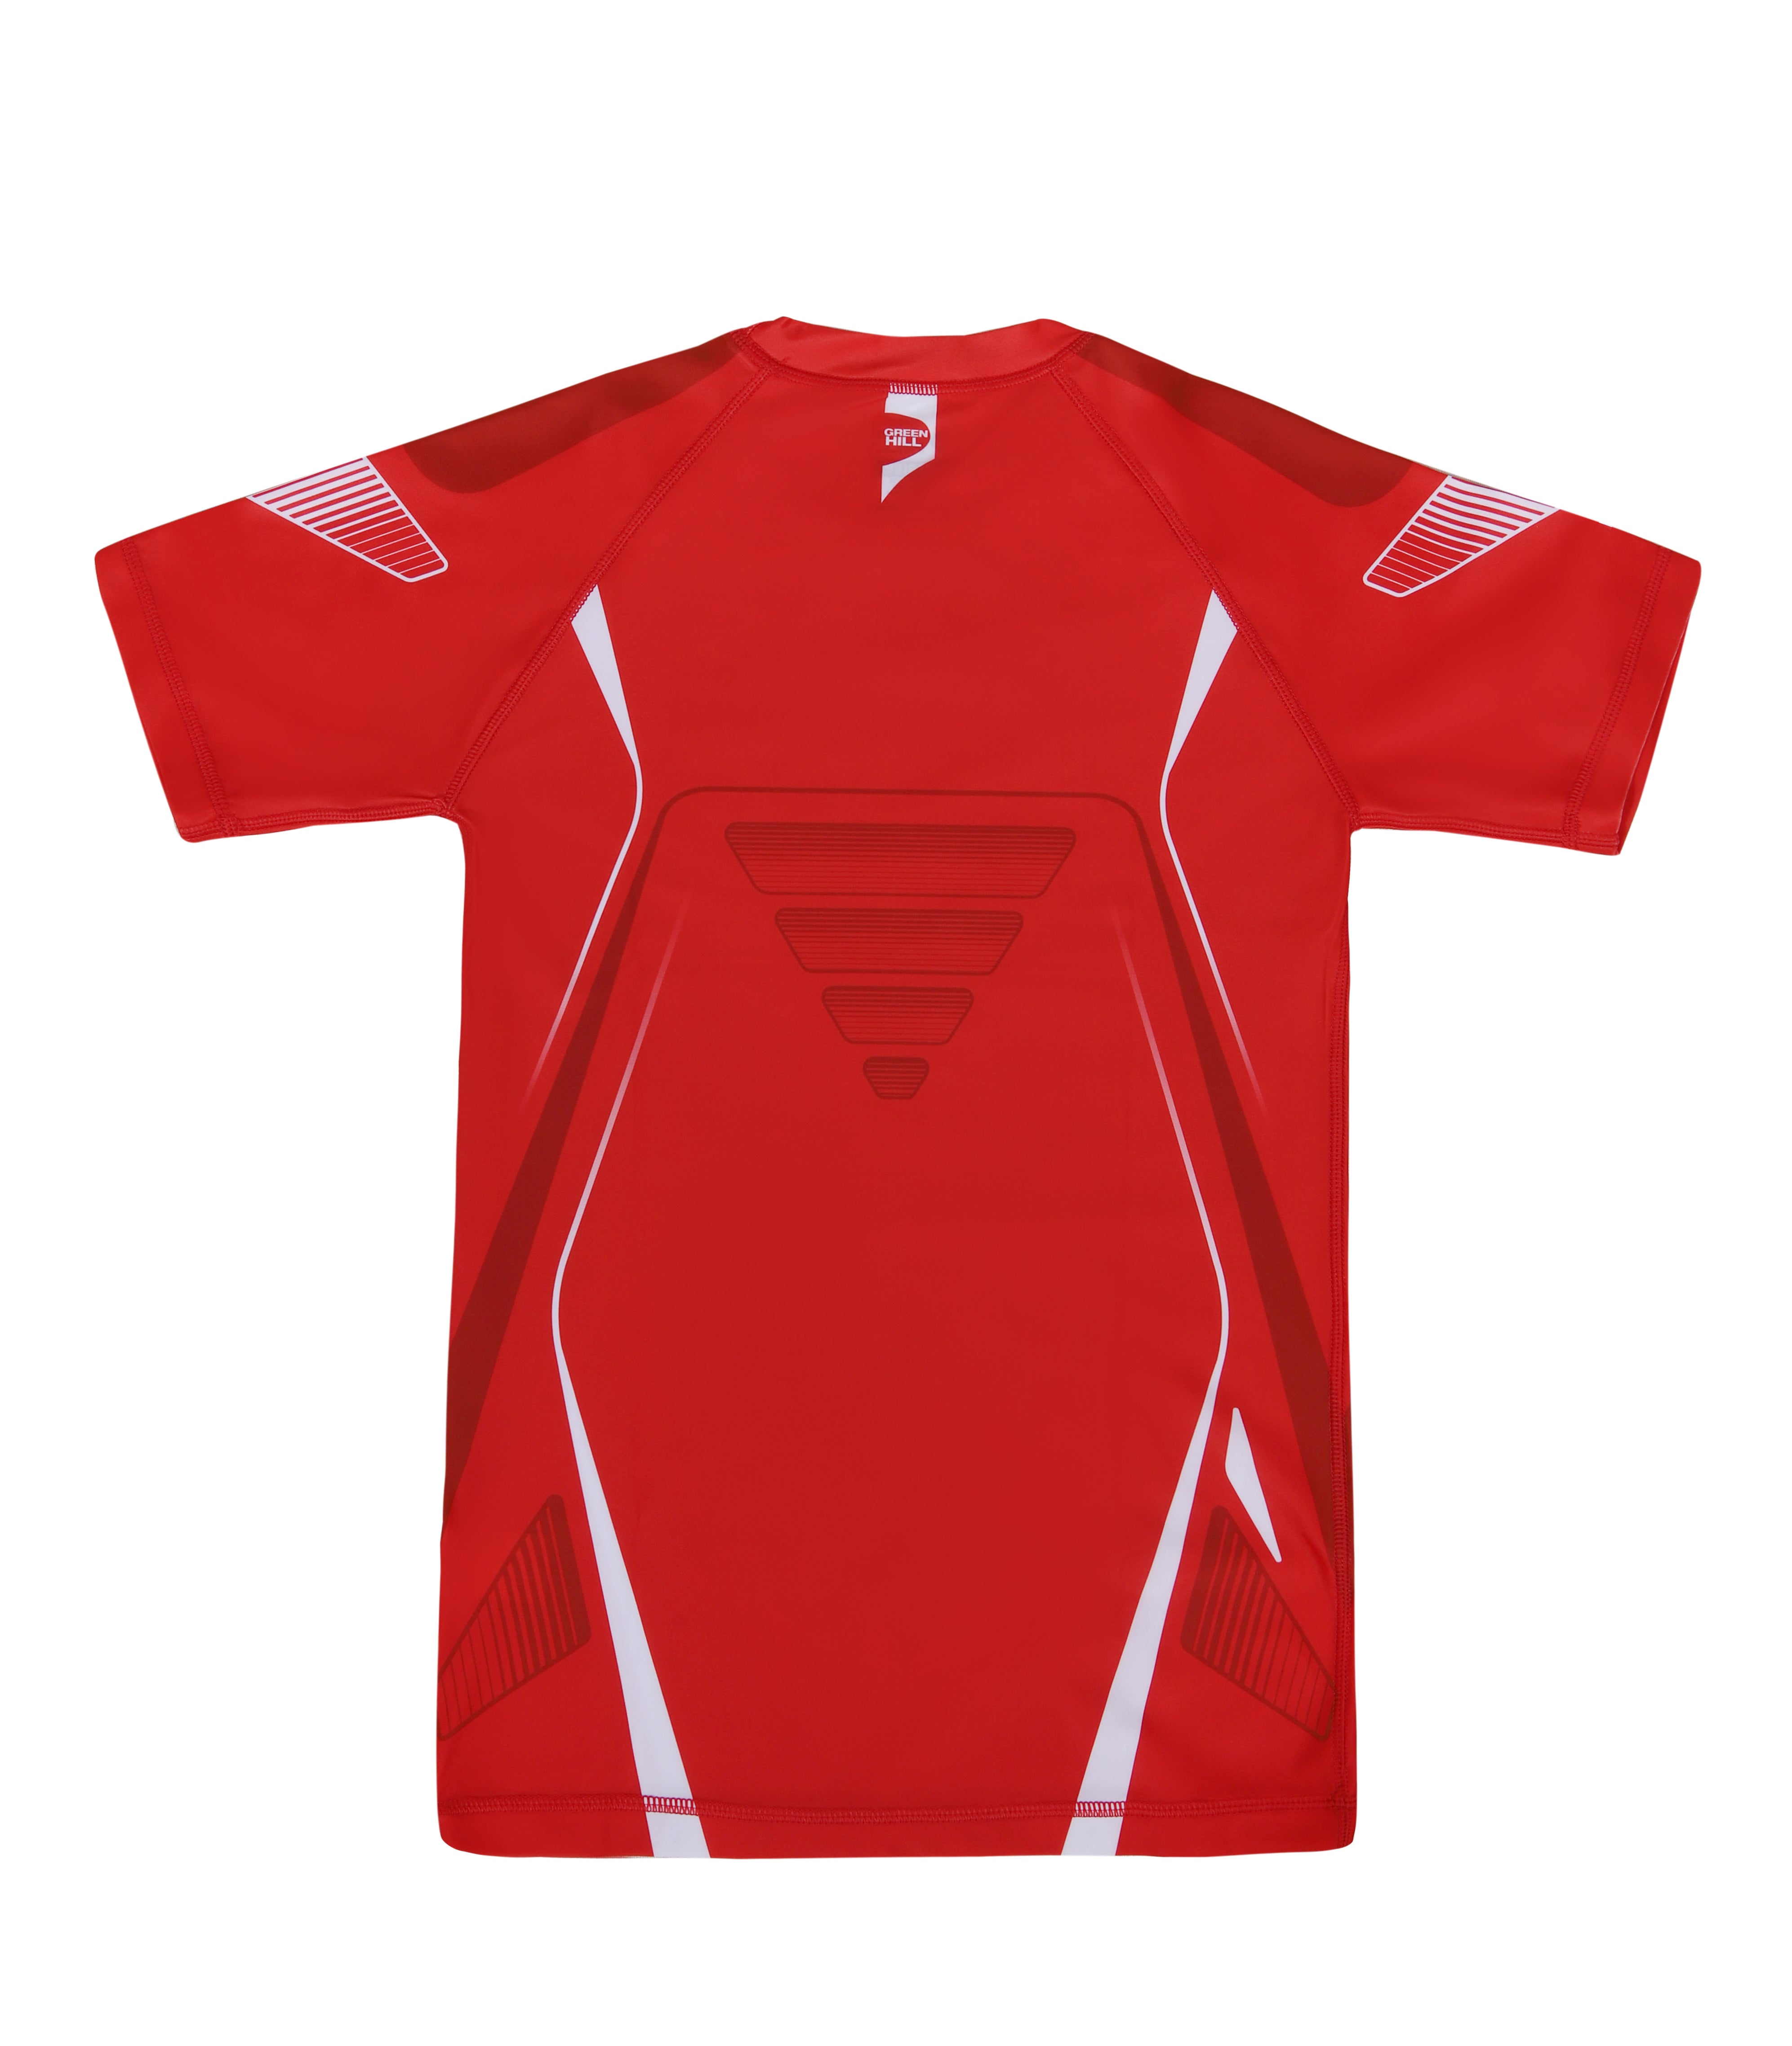 Green Hill Sublimated Rash Guard Red 2023